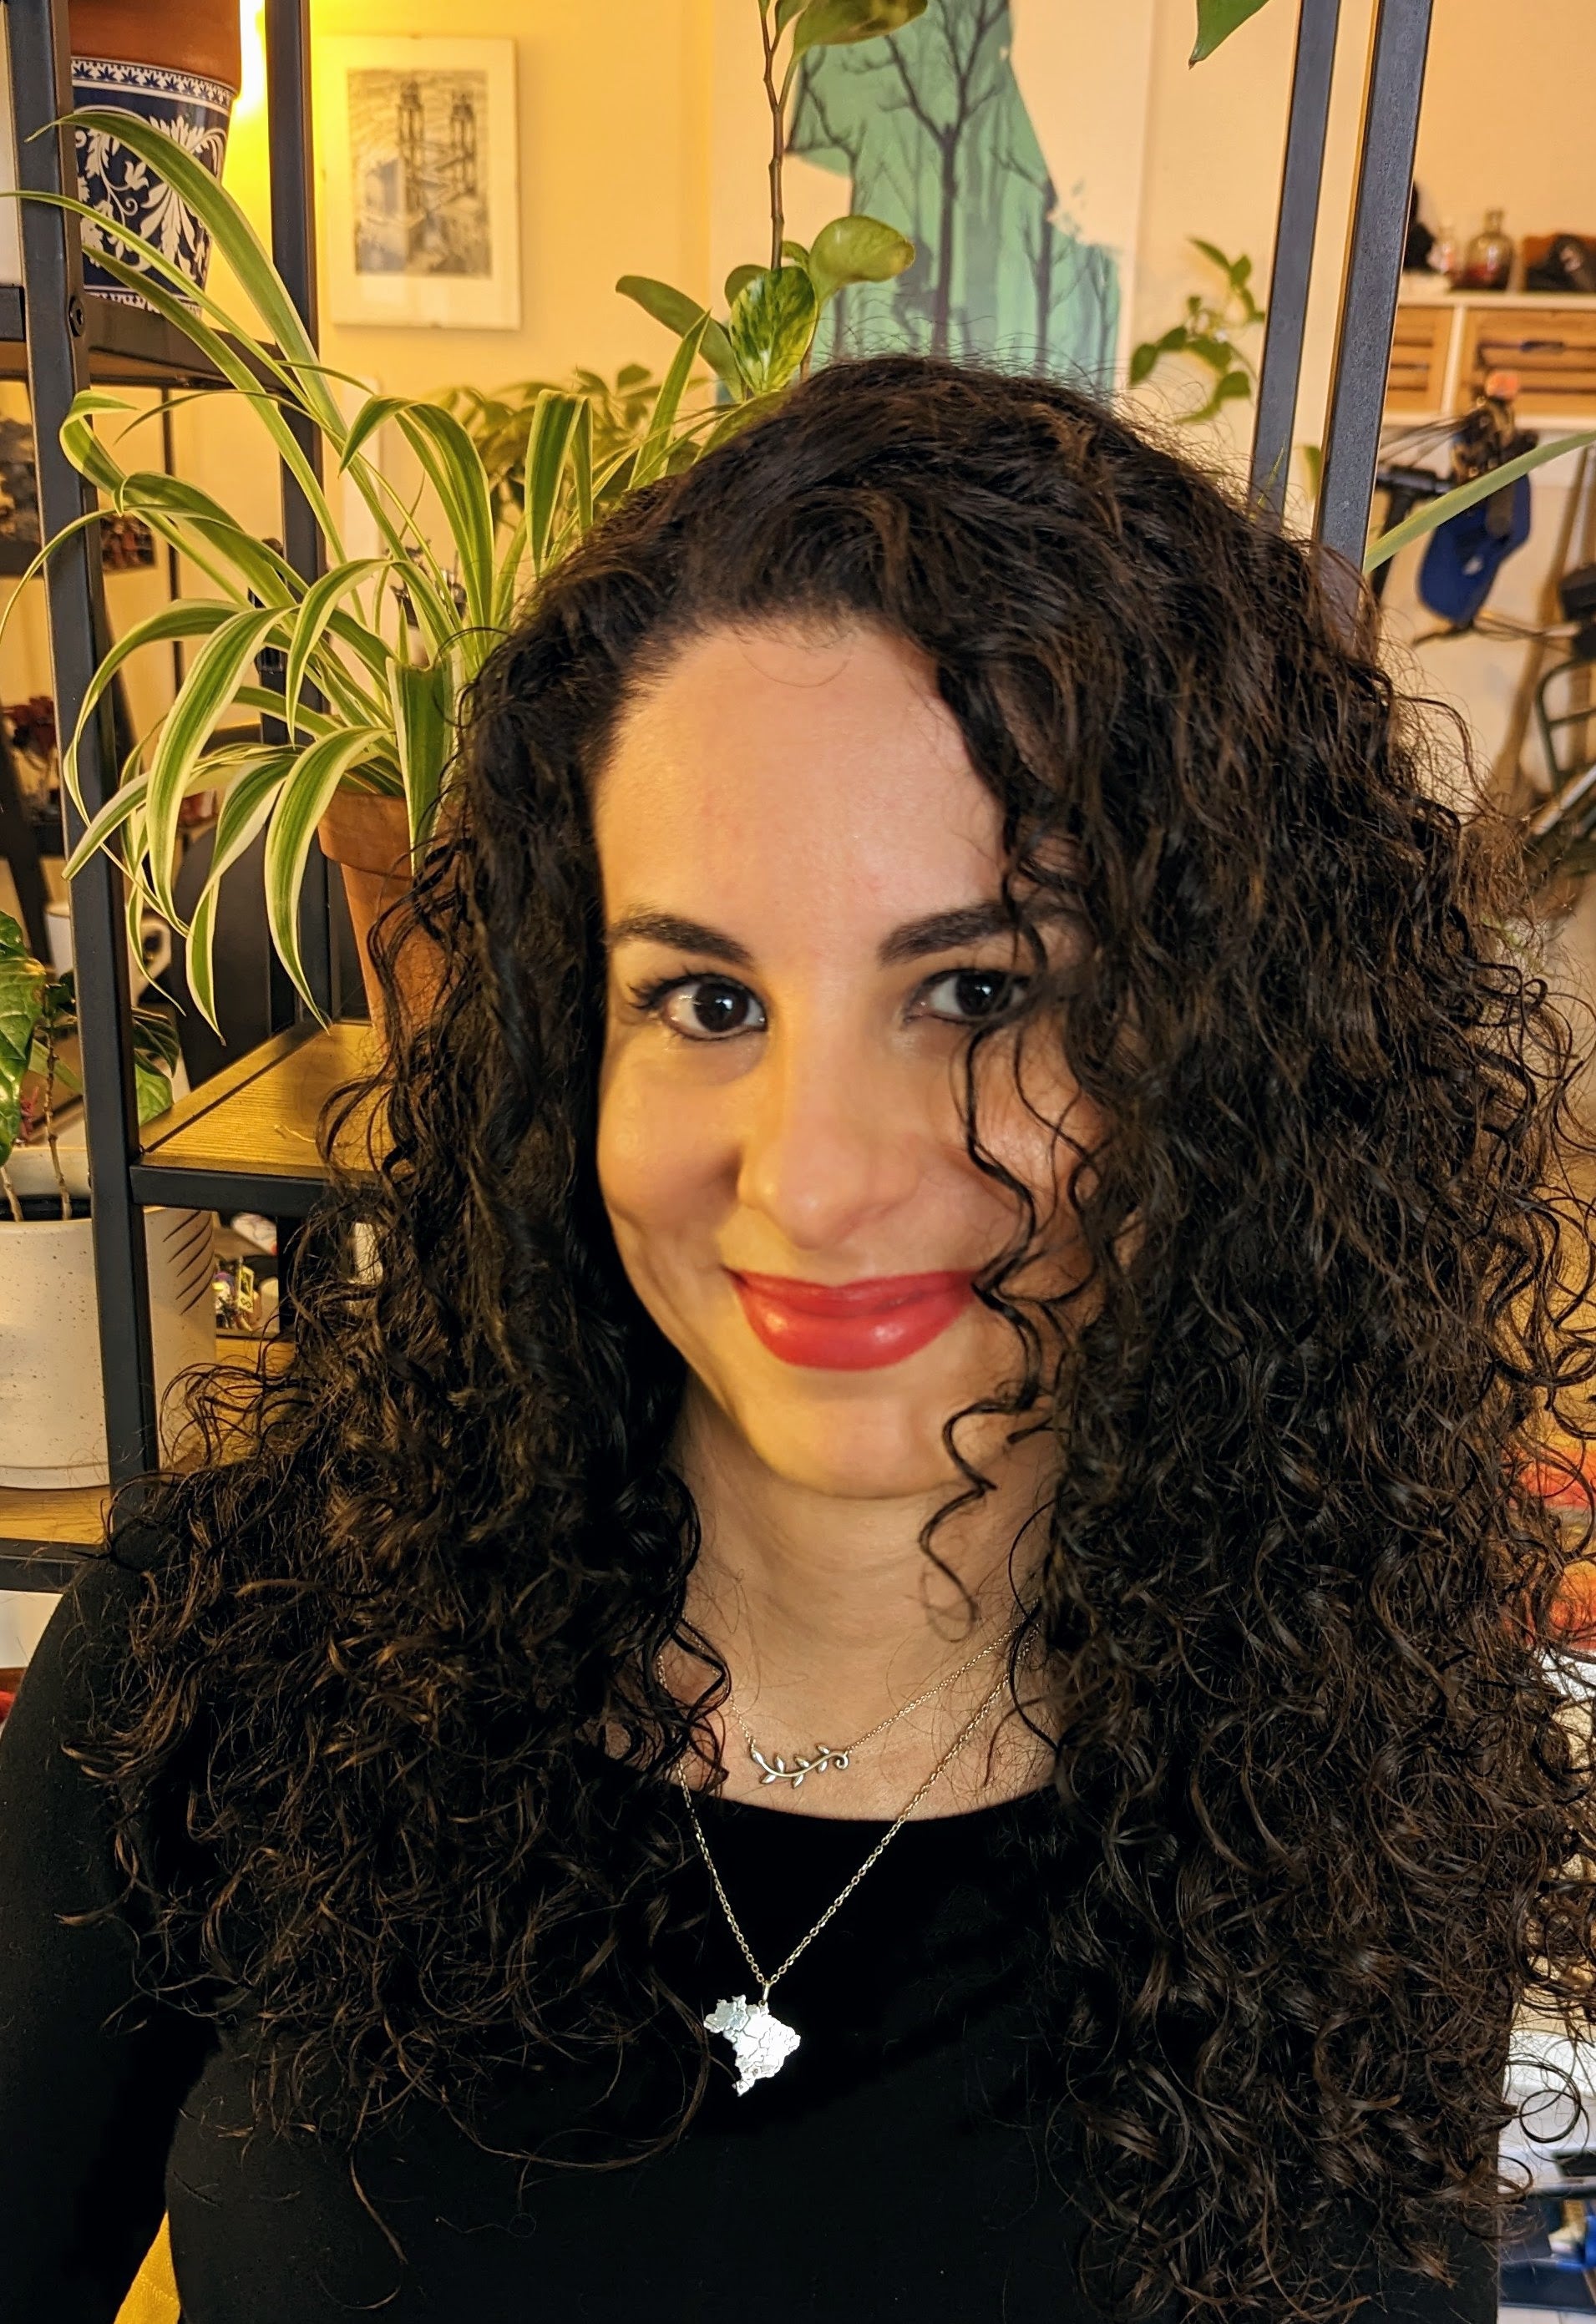 Amanda Fogaça. She has long dark curly hair and dark brown eyes. She is sitting in front of houseplants, wearing a black sweater, silver necklace, and red lipstick. She is looking into the camera and smiling.